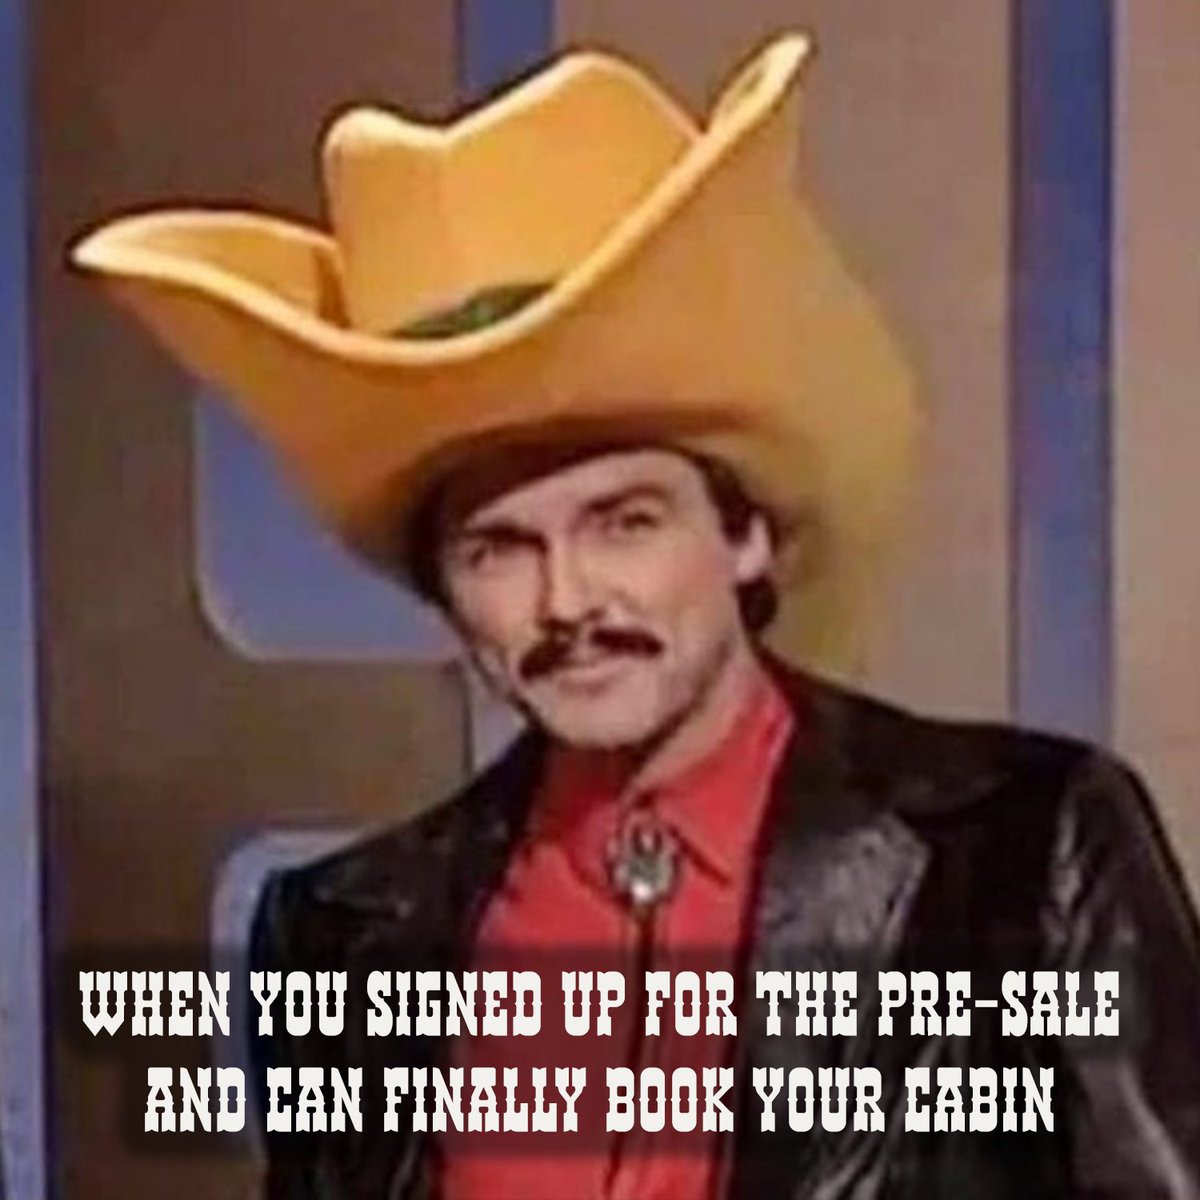 ❗Check your emails!❗If you registered for the first round of our pre-sale before 11:59 pm ET last night, details about your Earliest Booking Time are now in your inbox 📩 AND if you book before April 7, you'll get $100 off per person and $50 excursion credit per cabin! 🤠